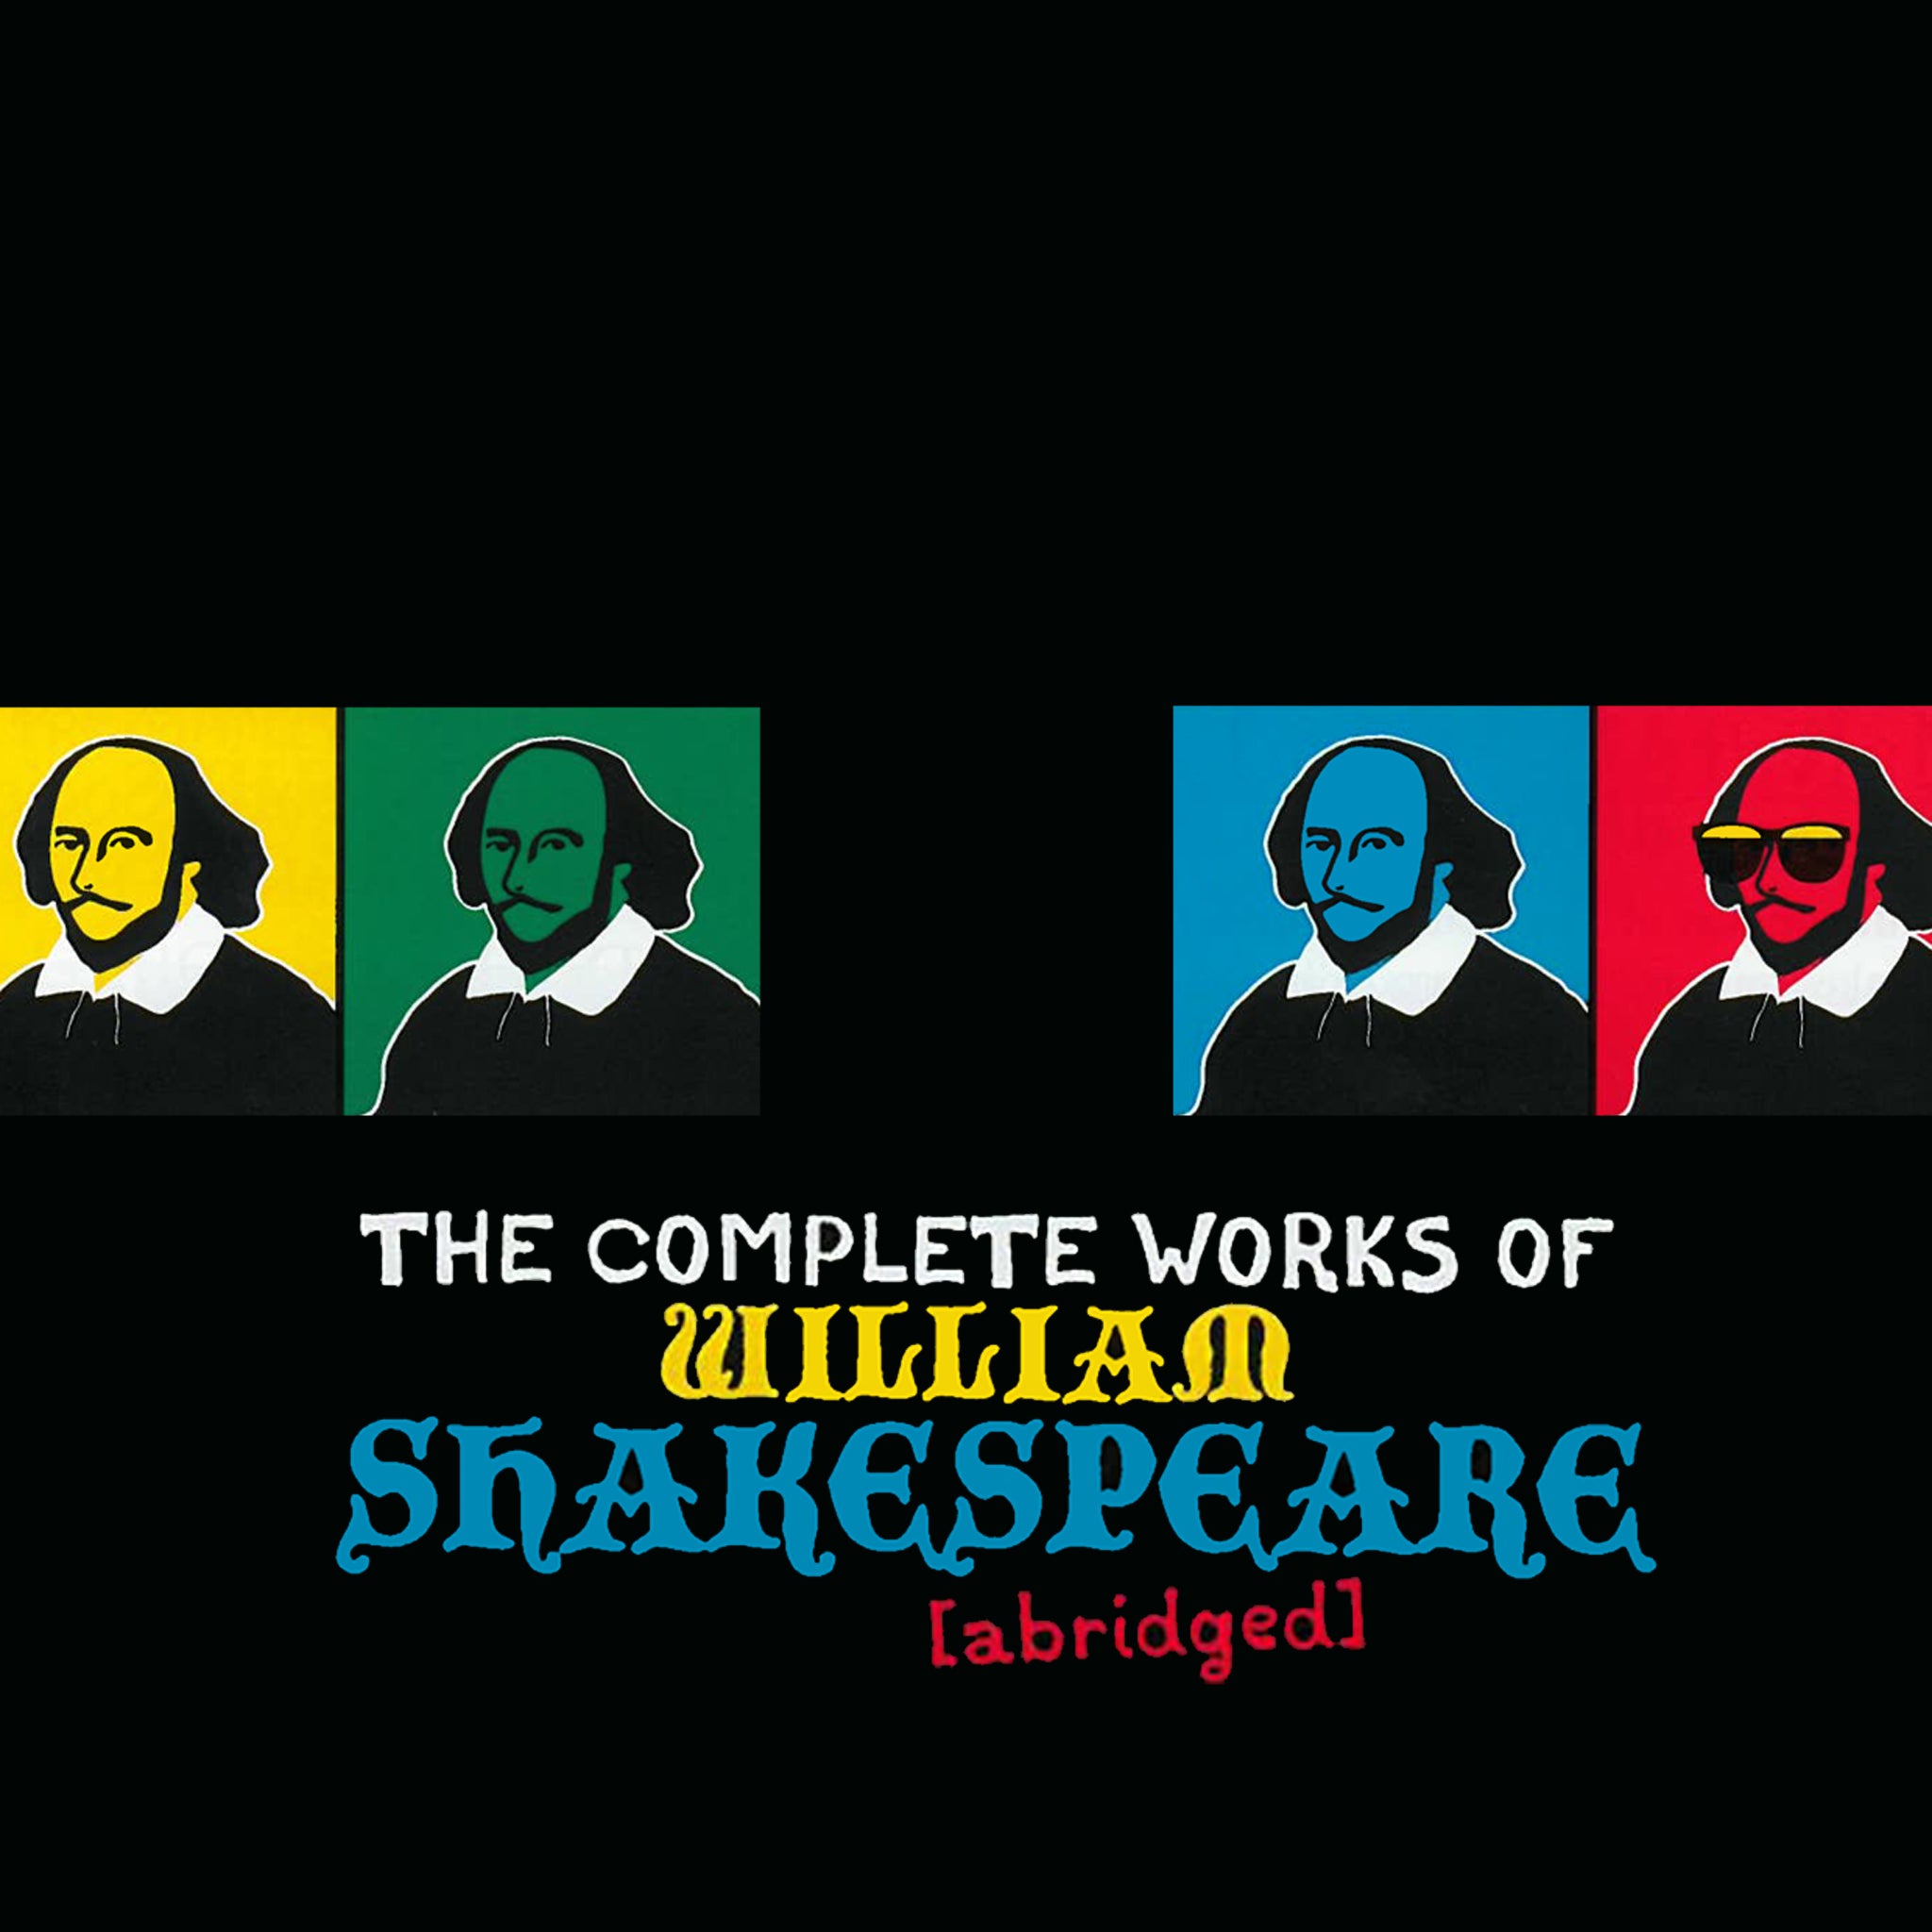 The Complete Works of William Shakespeare (abridged) performed by Malvern Theater Society - Active Image Media